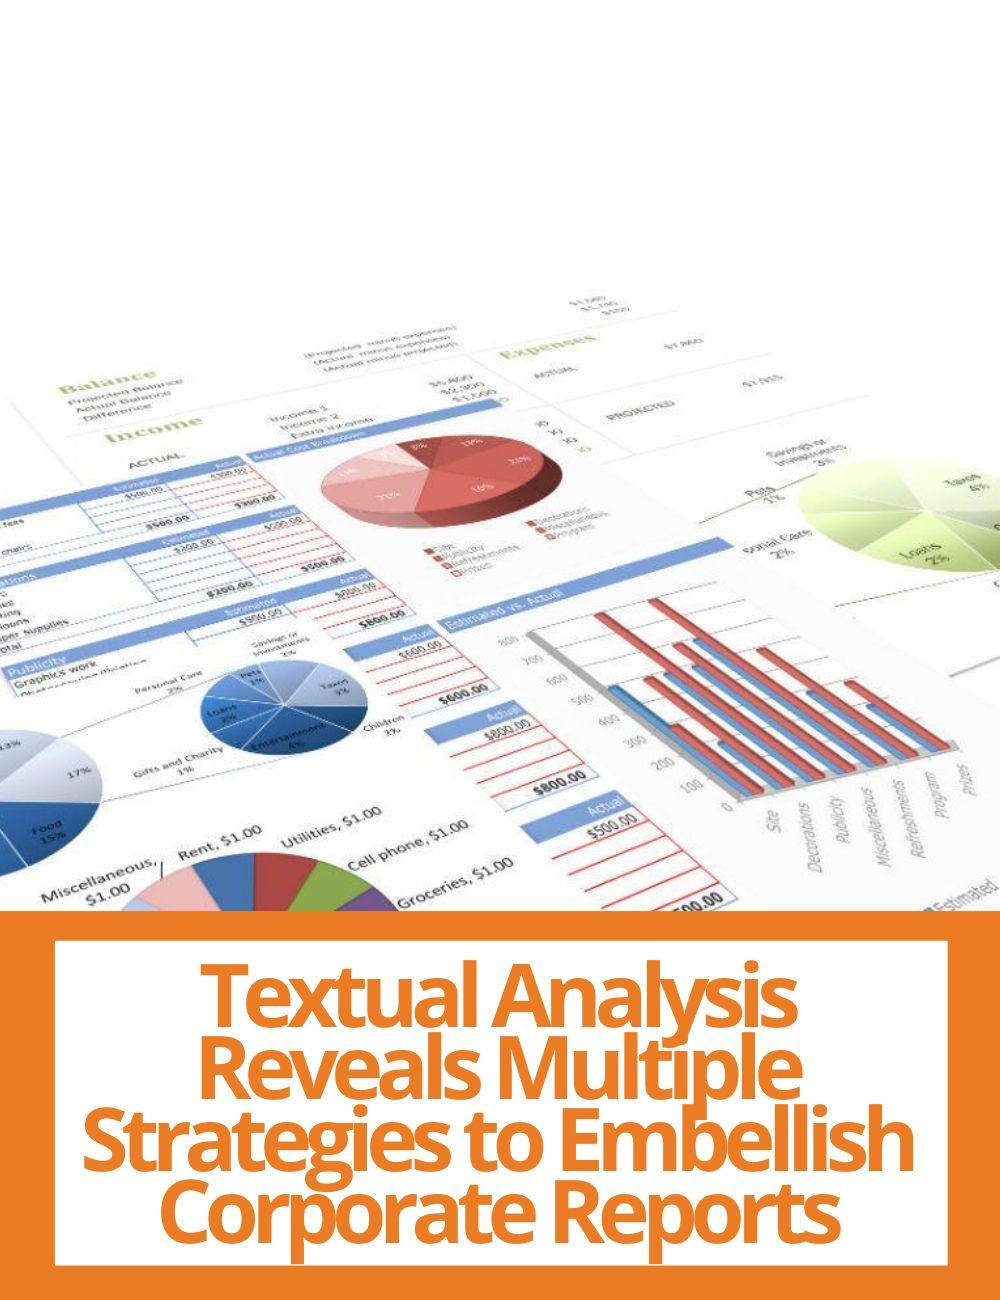 Link to related stories. Image: tables. Story headline: Textual Analysis Reveals Multiple Strategies to Embellish Corporate Reports